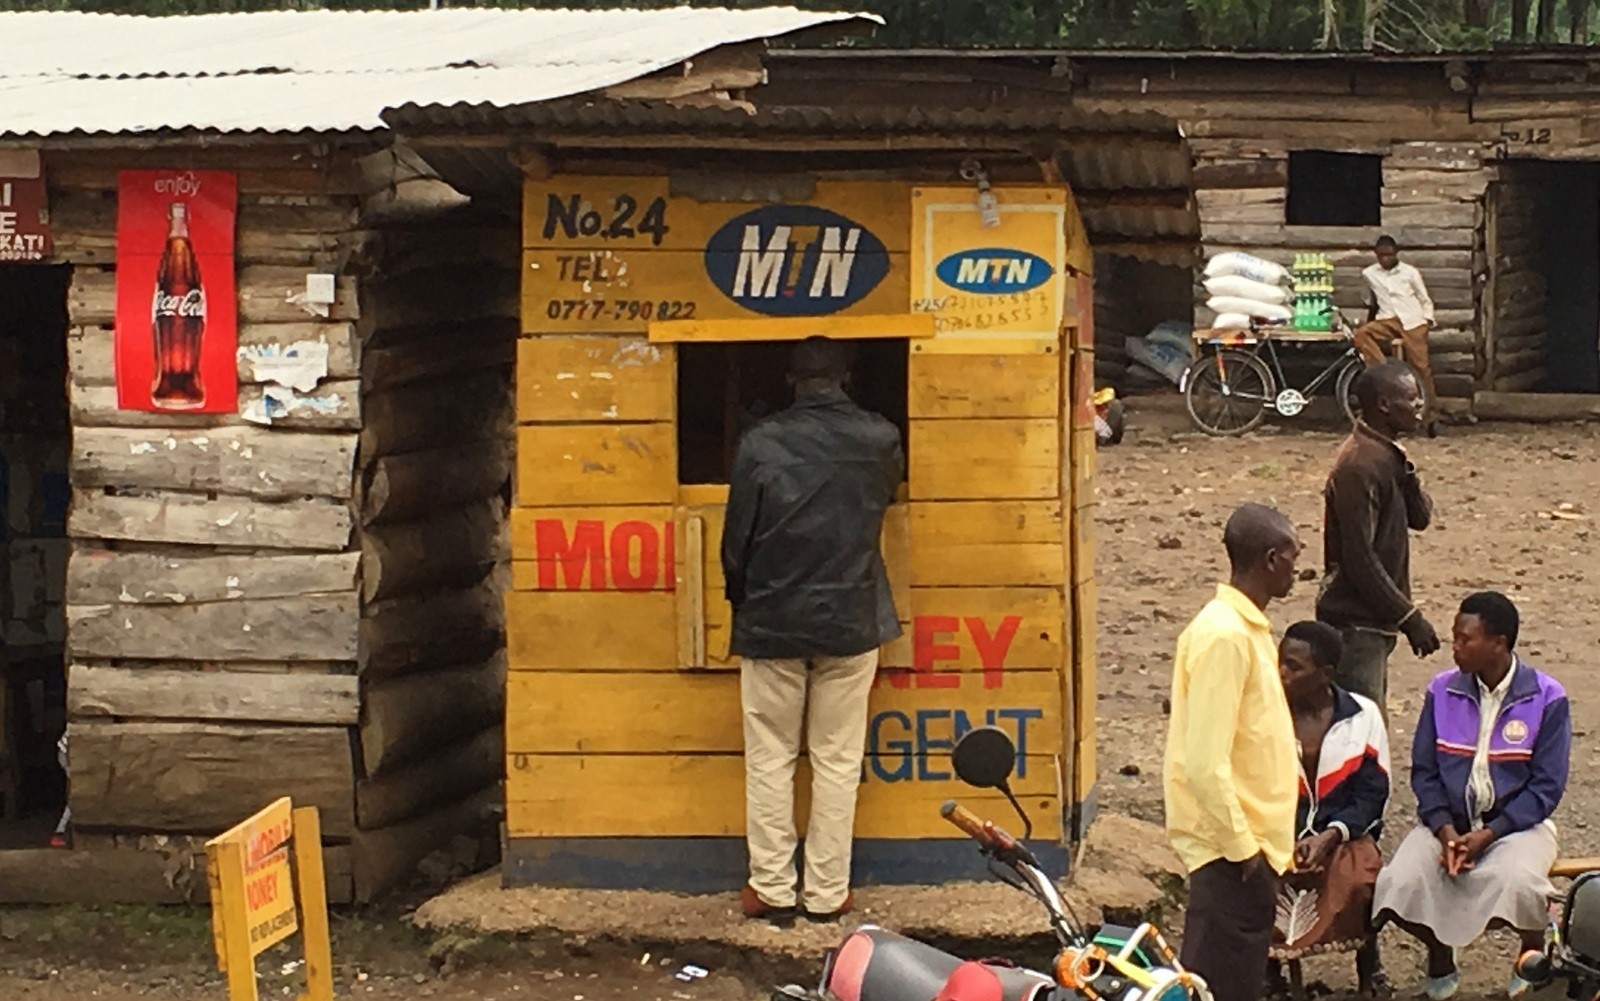 Mobile in Africa